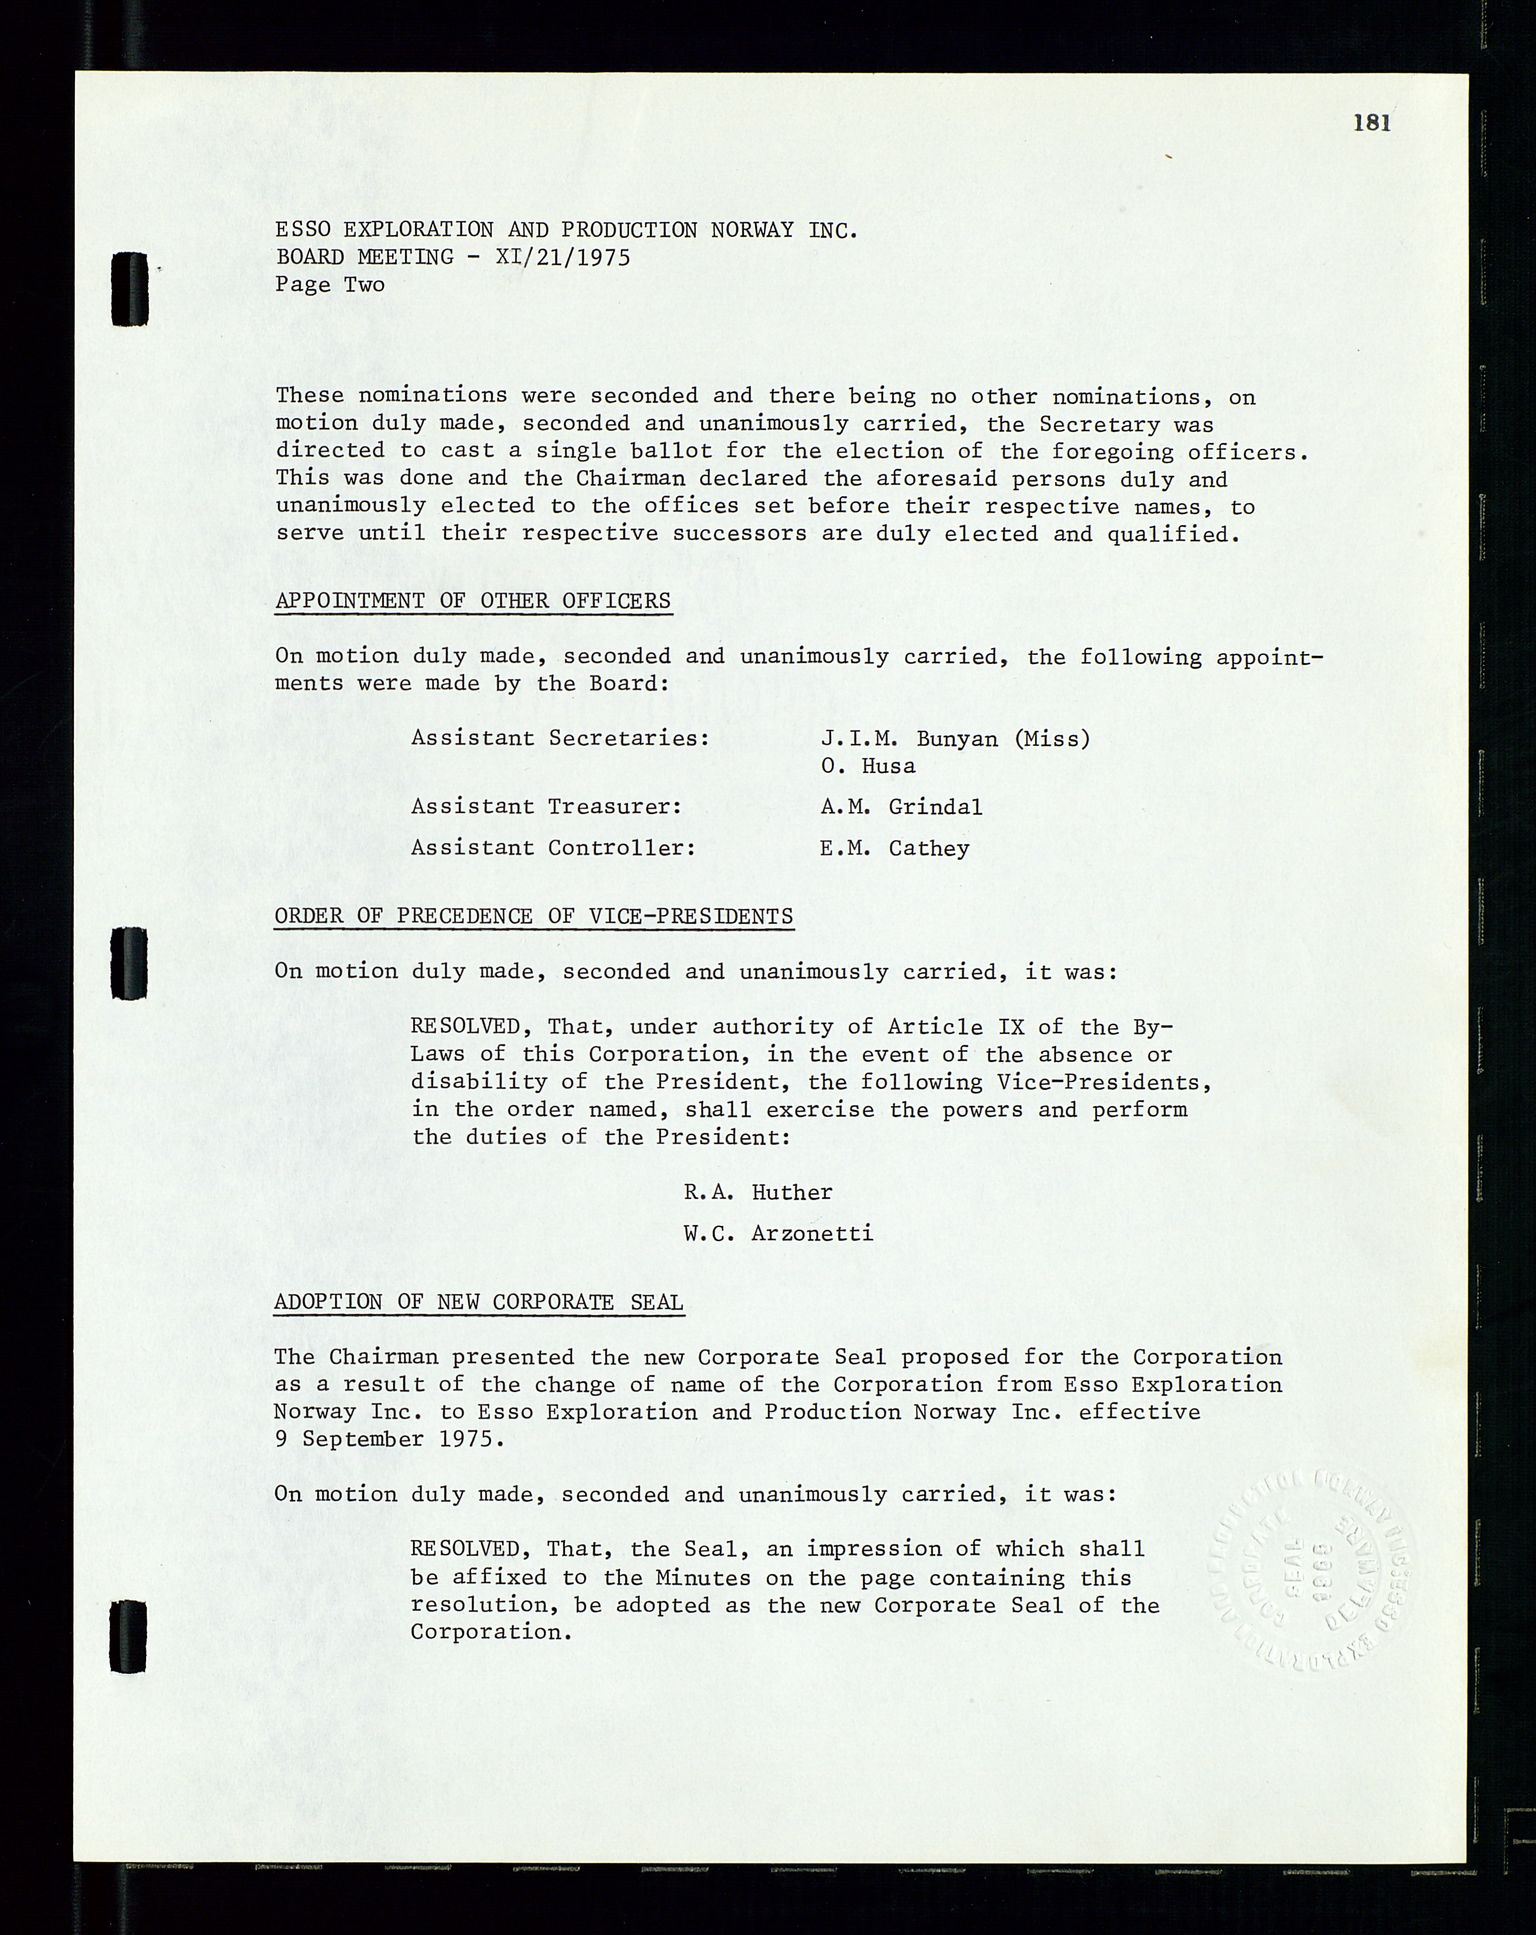 Pa 1512 - Esso Exploration and Production Norway Inc., SAST/A-101917/A/Aa/L0001/0002: Styredokumenter / Corporate records, Board meeting minutes, Agreements, Stocholder meetings, 1975-1979, p. 19